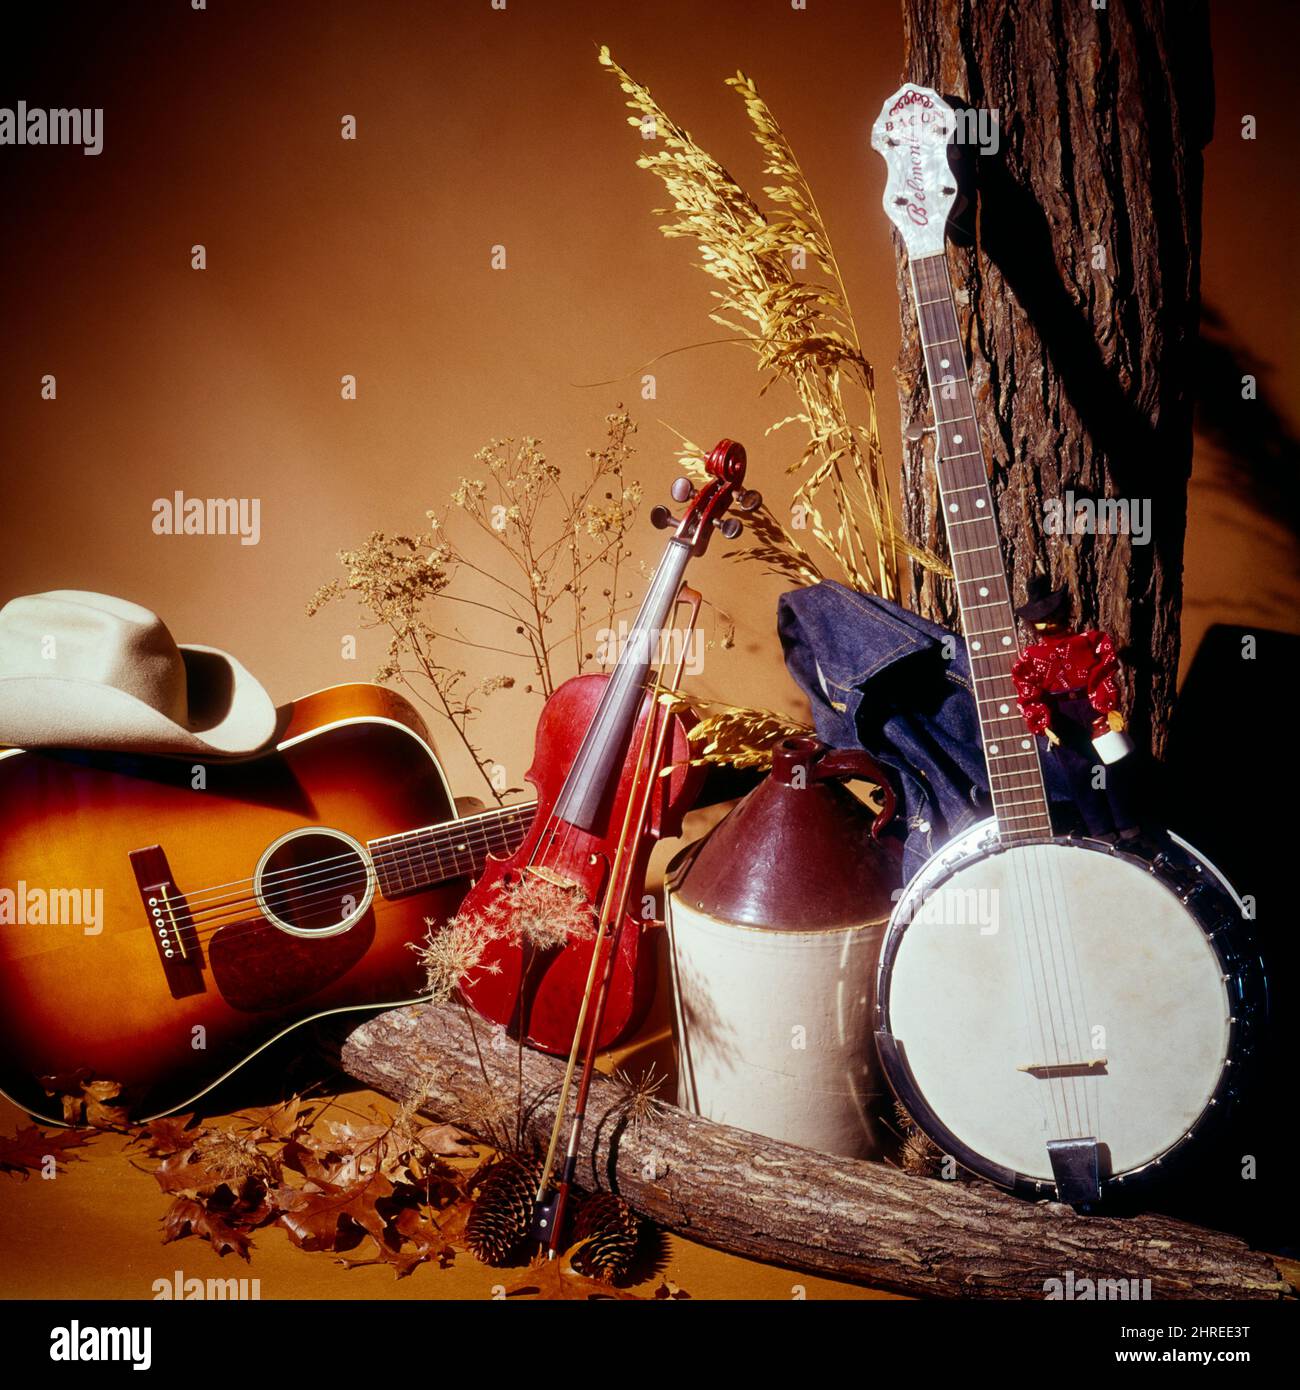 1970s COUNTRY AND WESTERN MUSICAL INSTRUMENTS MOTIF BANJO GUITAR FIDDLE COWBOY HAT OLD MOONSHINE JUG BLUE JEAN JACKET BANDANA - km2934 PHT001 HARS AND RECREATION TREE TRUNK BANDANA FIDDLE OCCUPATIONS MUSICAL INSTRUMENT BANJO CONCEPTUAL STILL LIFE STYLISH MOONSHINE MUSICAL INSTRUMENTS JUG TREE BARK BLUEGRASS CREATIVITY JEAN ROOTS MOTIF OLD FASHIONED Stock Photo